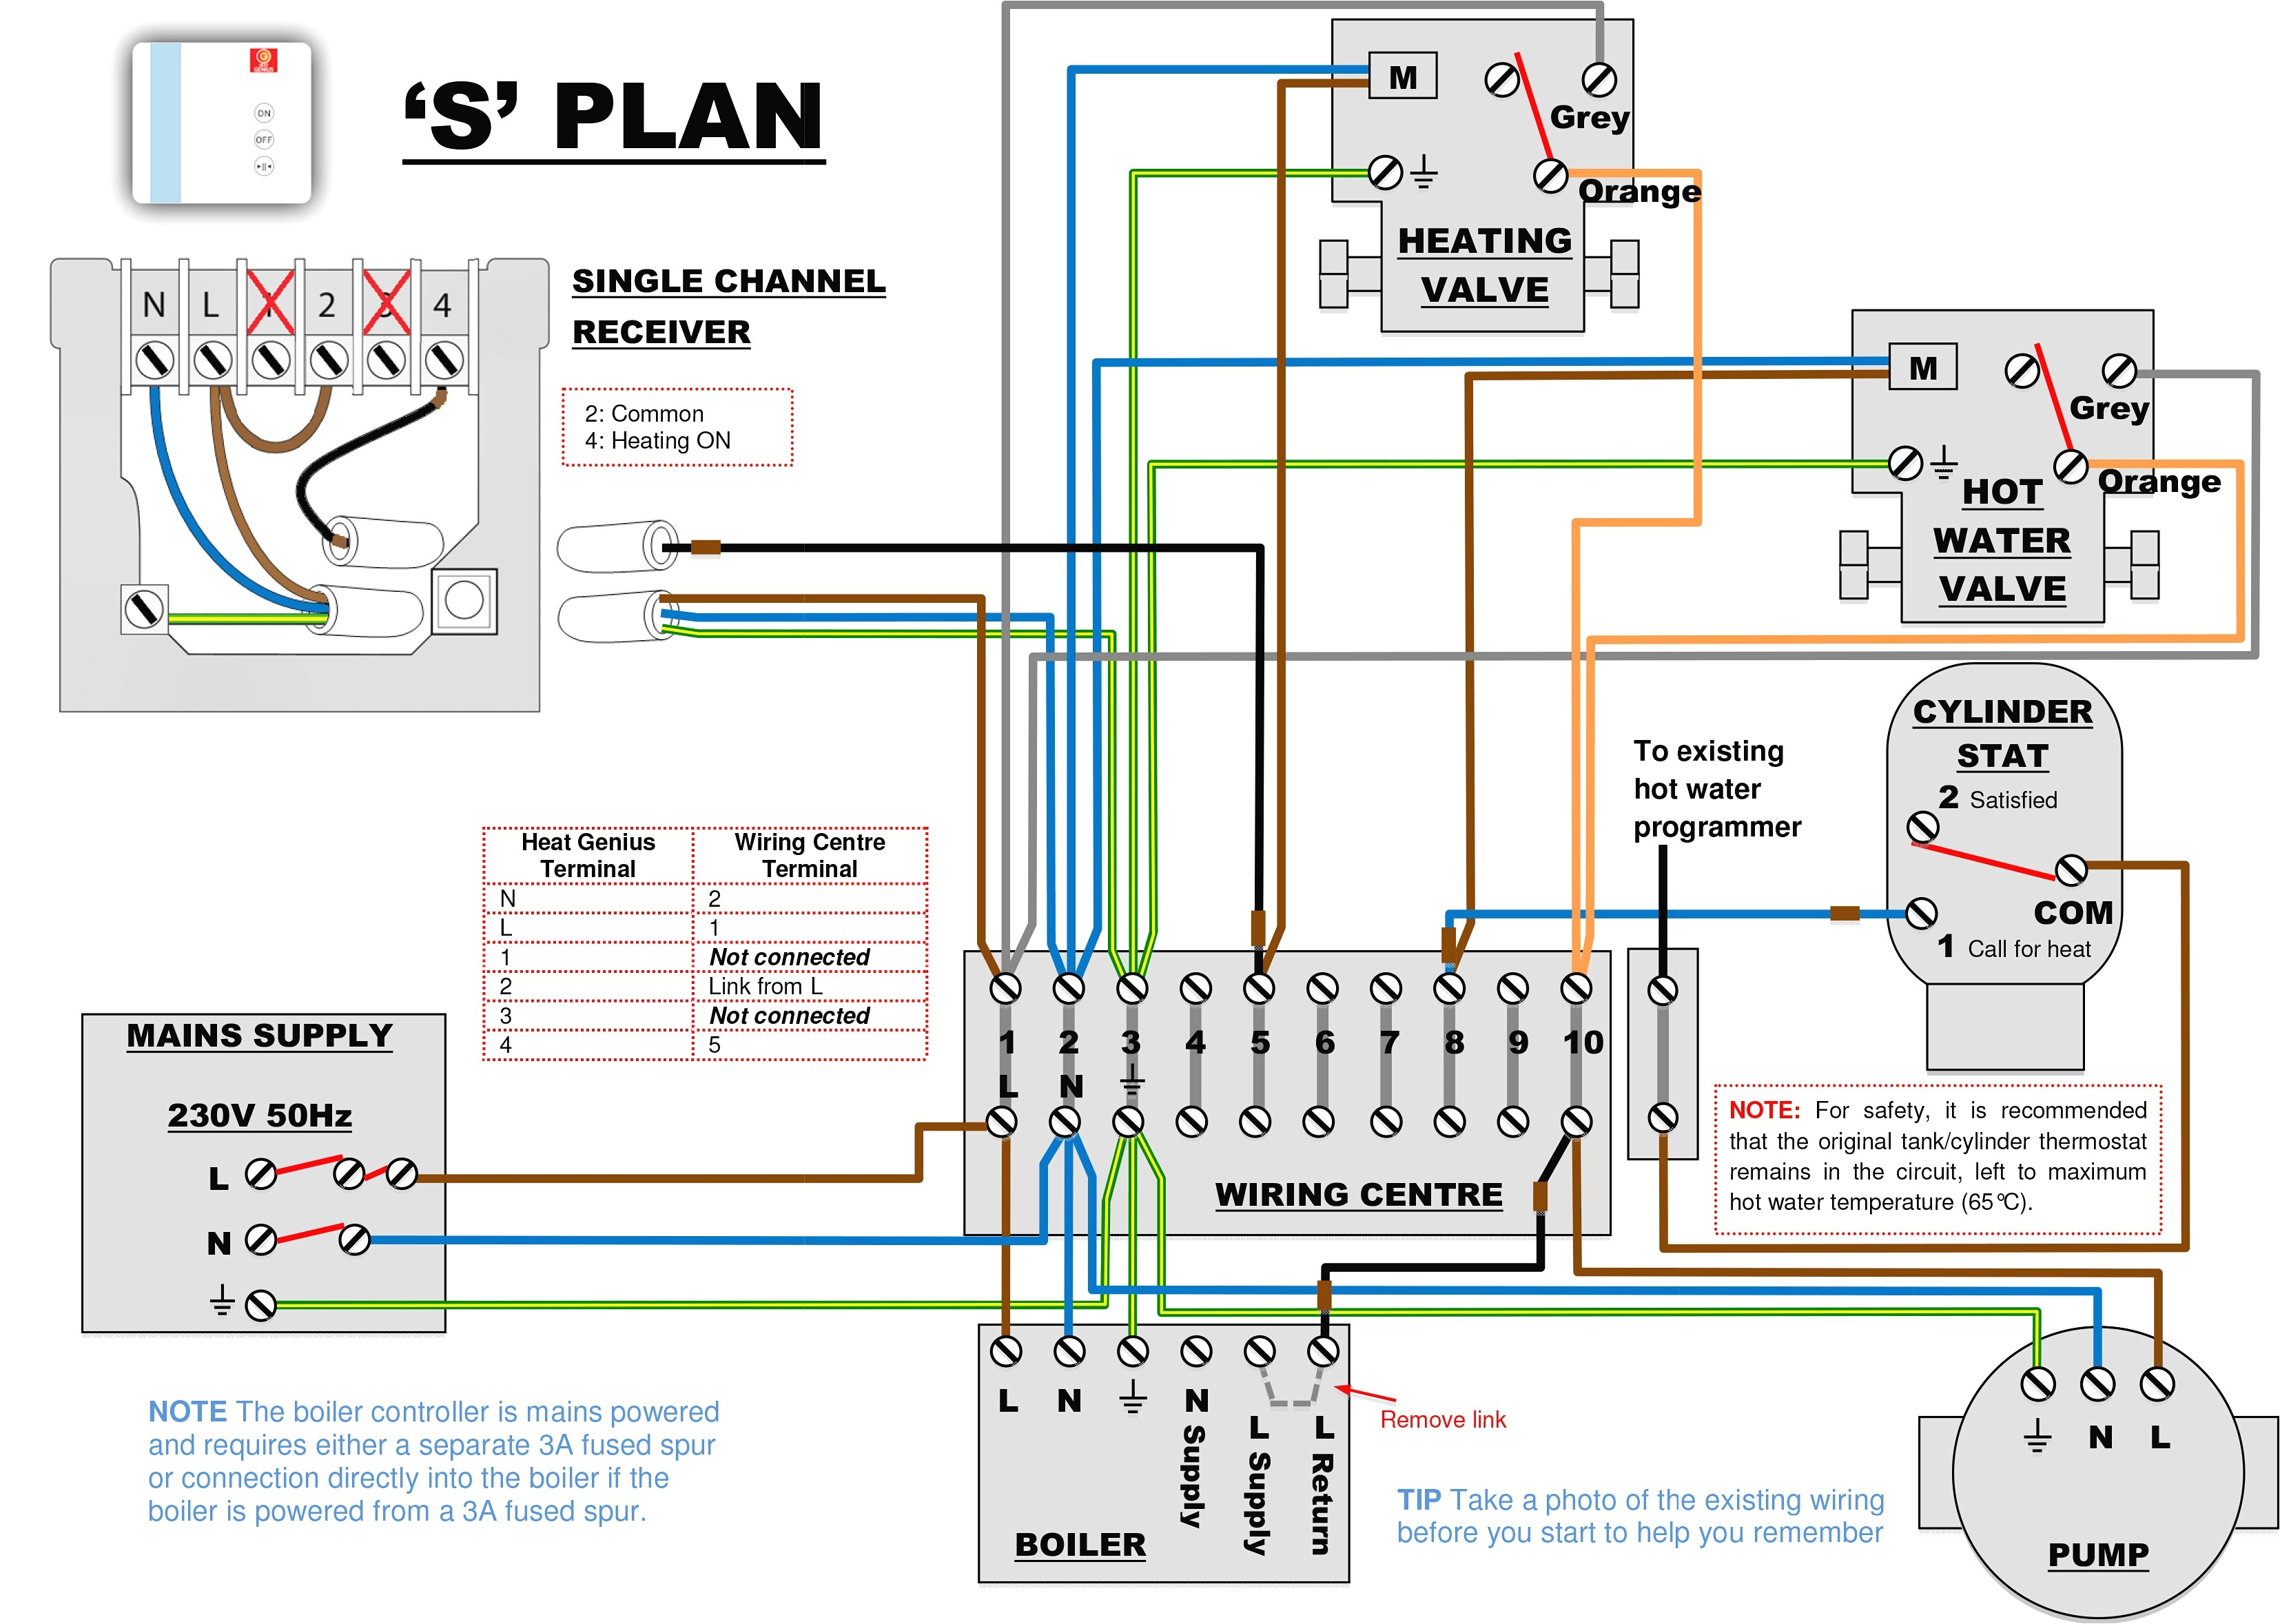 central heating boiler wiring connection diagram5 300x300 central central heating boiler wiring connection diagram5 300x300 central